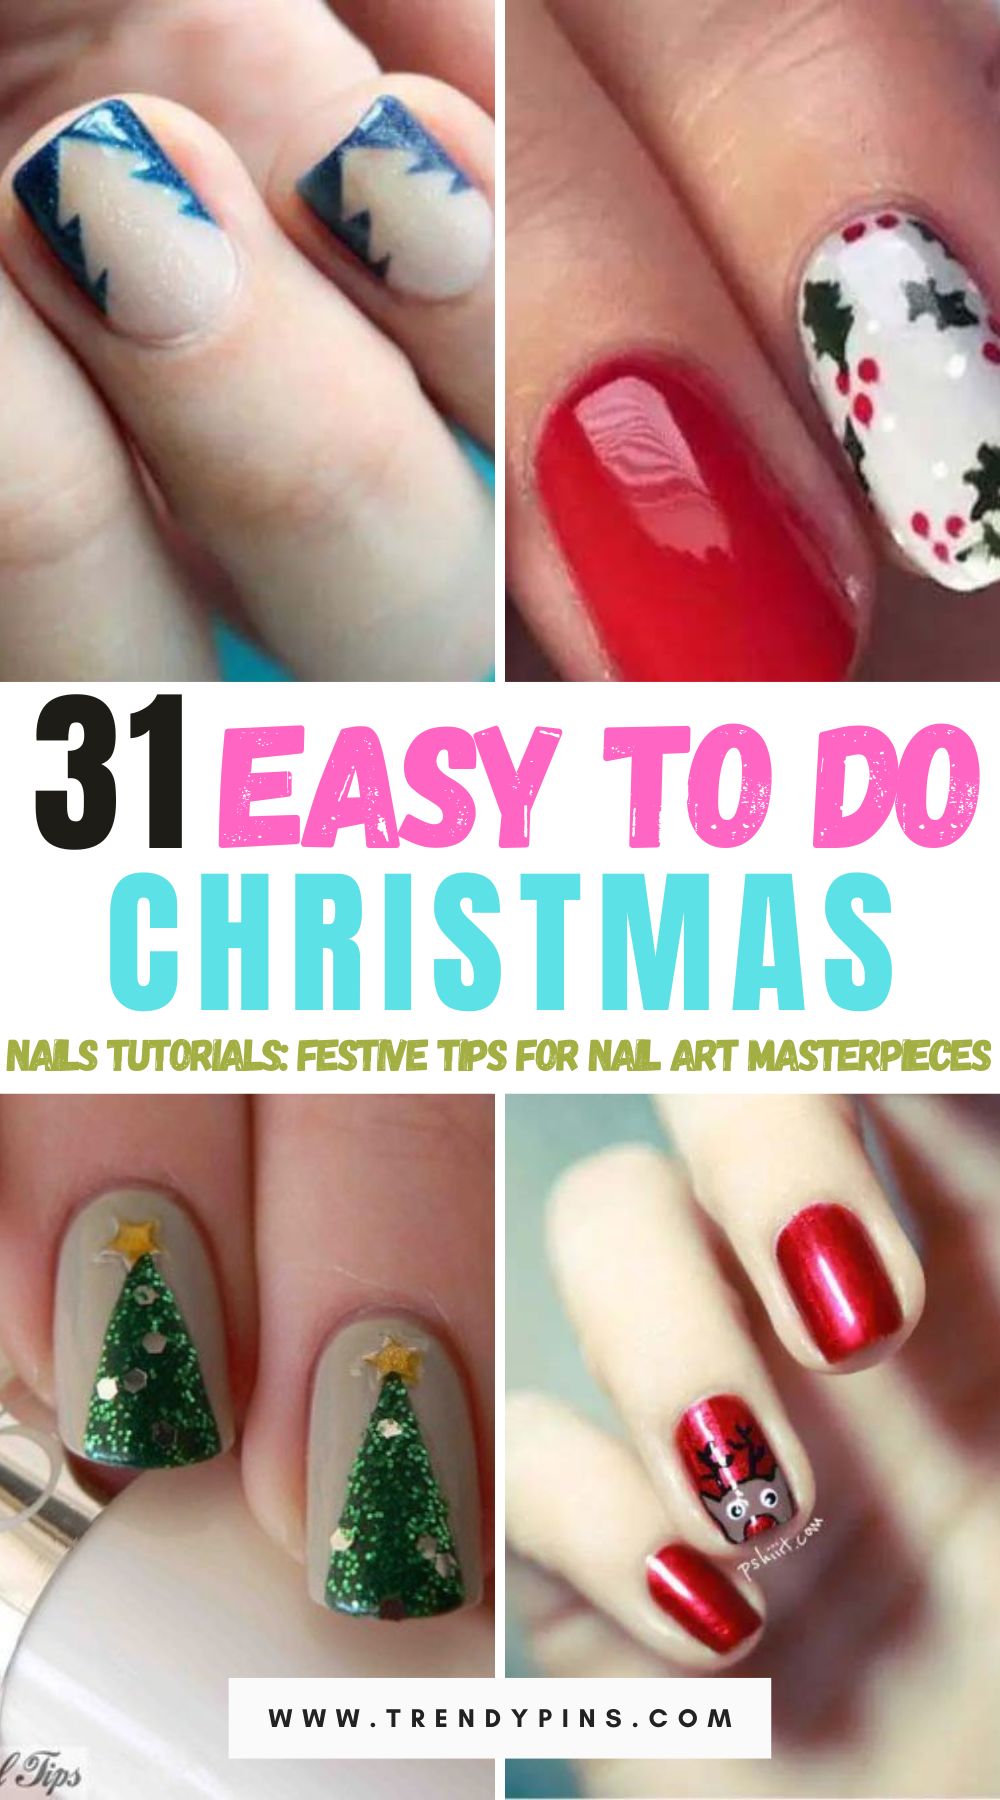 Dazzle your fingertips with our collection of 30 easy Christmas nails tutorials, offering festive tips to unleash your inner nail art maestro. Click to transform your manicure into a holiday masterpiece, adding a touch of glamour and merriment to your seasonal style